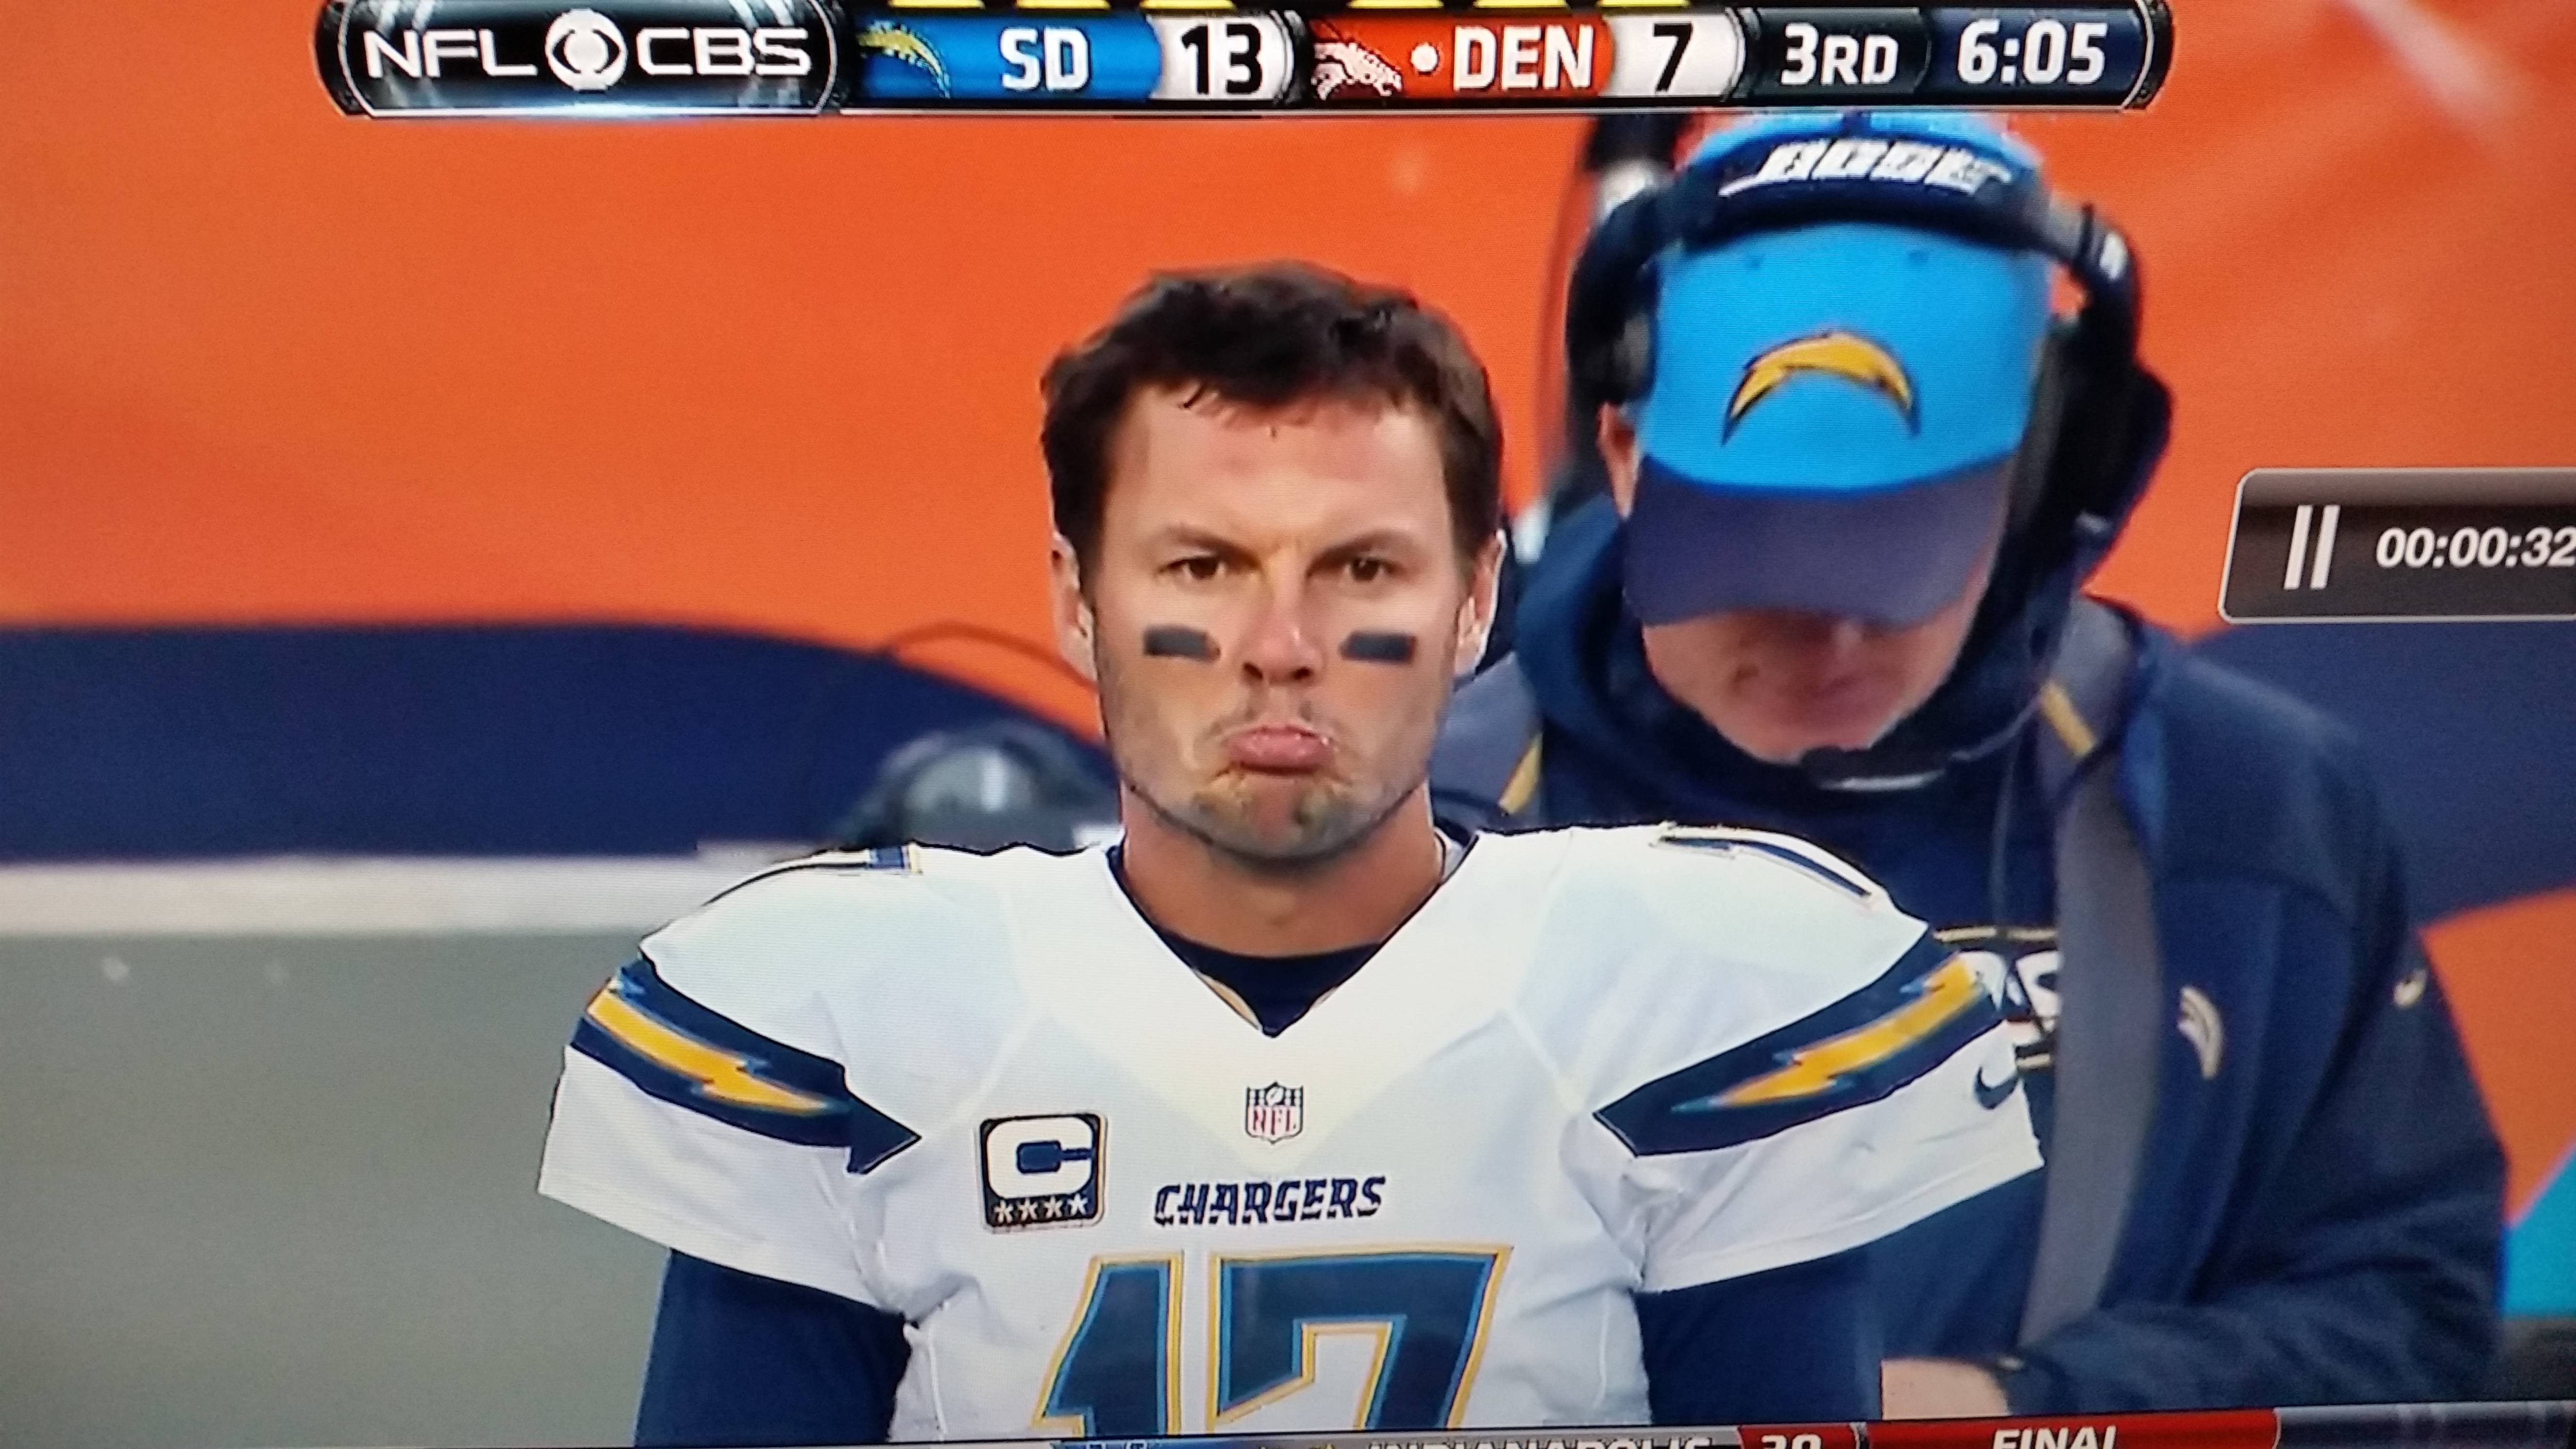 LOOK: Philip Rivers shows us exactly what it looks like to lose to the Denver Broncos ...5312 x 2988